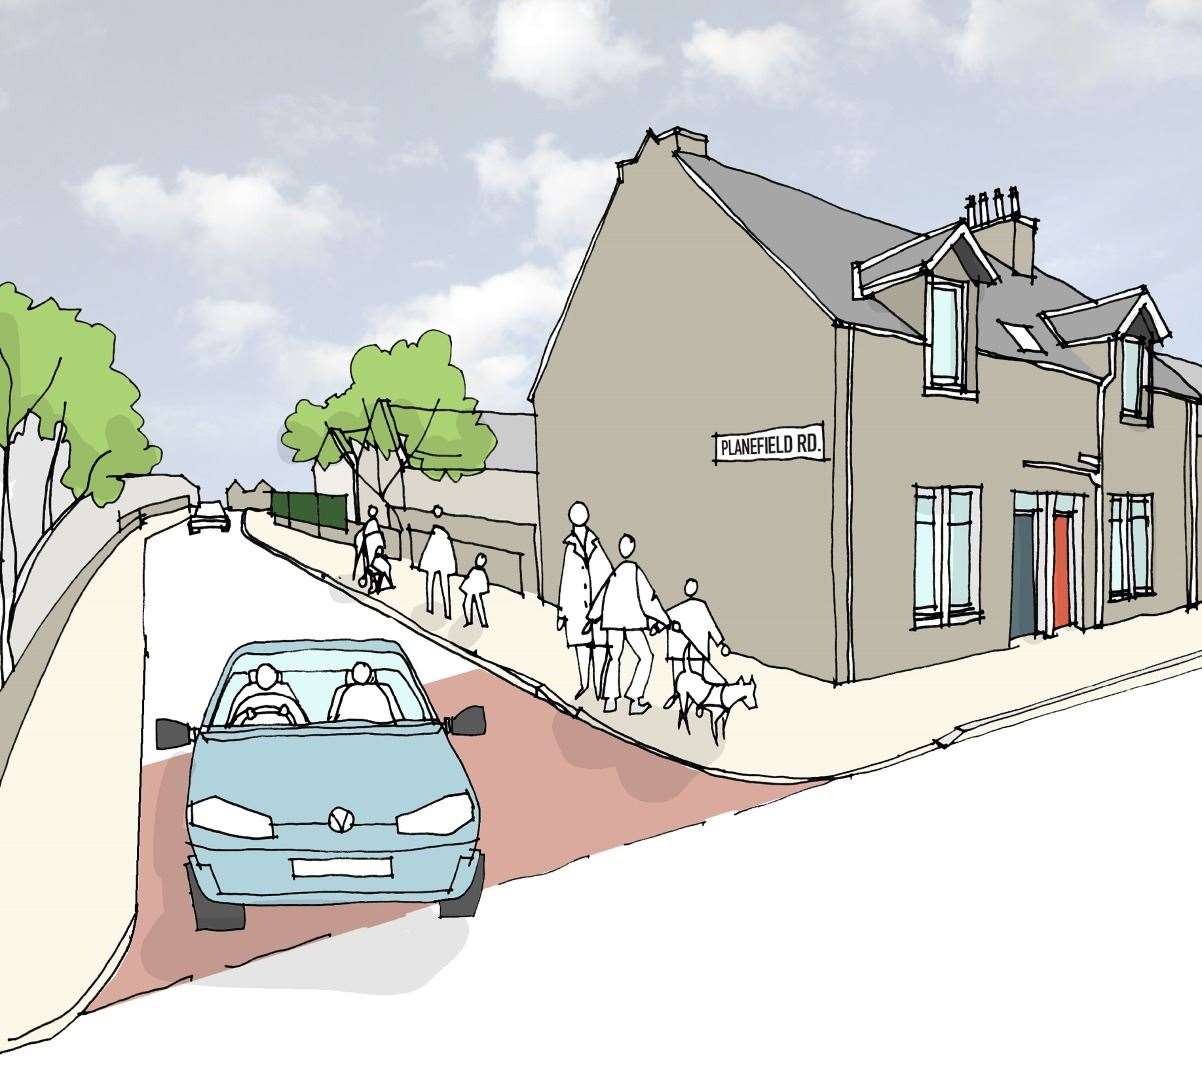 A concept drawing of one of the possible interventions showing what could be done in Planefield Road to improve pedestrian safety. This is just a concept image and not a concrete design.